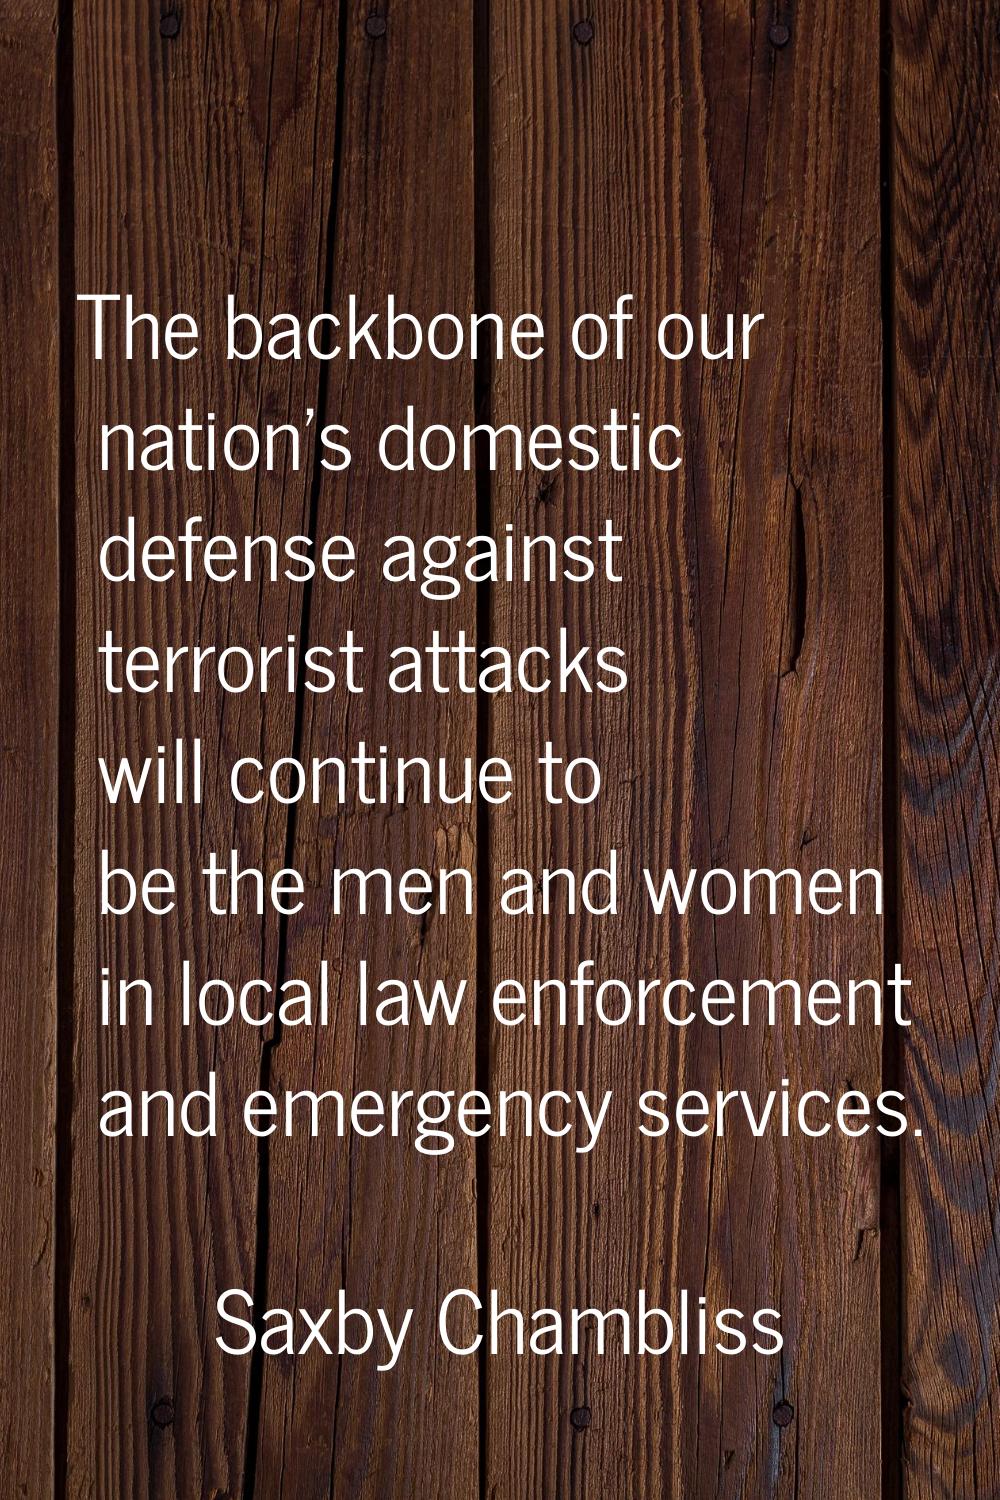 The backbone of our nation's domestic defense against terrorist attacks will continue to be the men